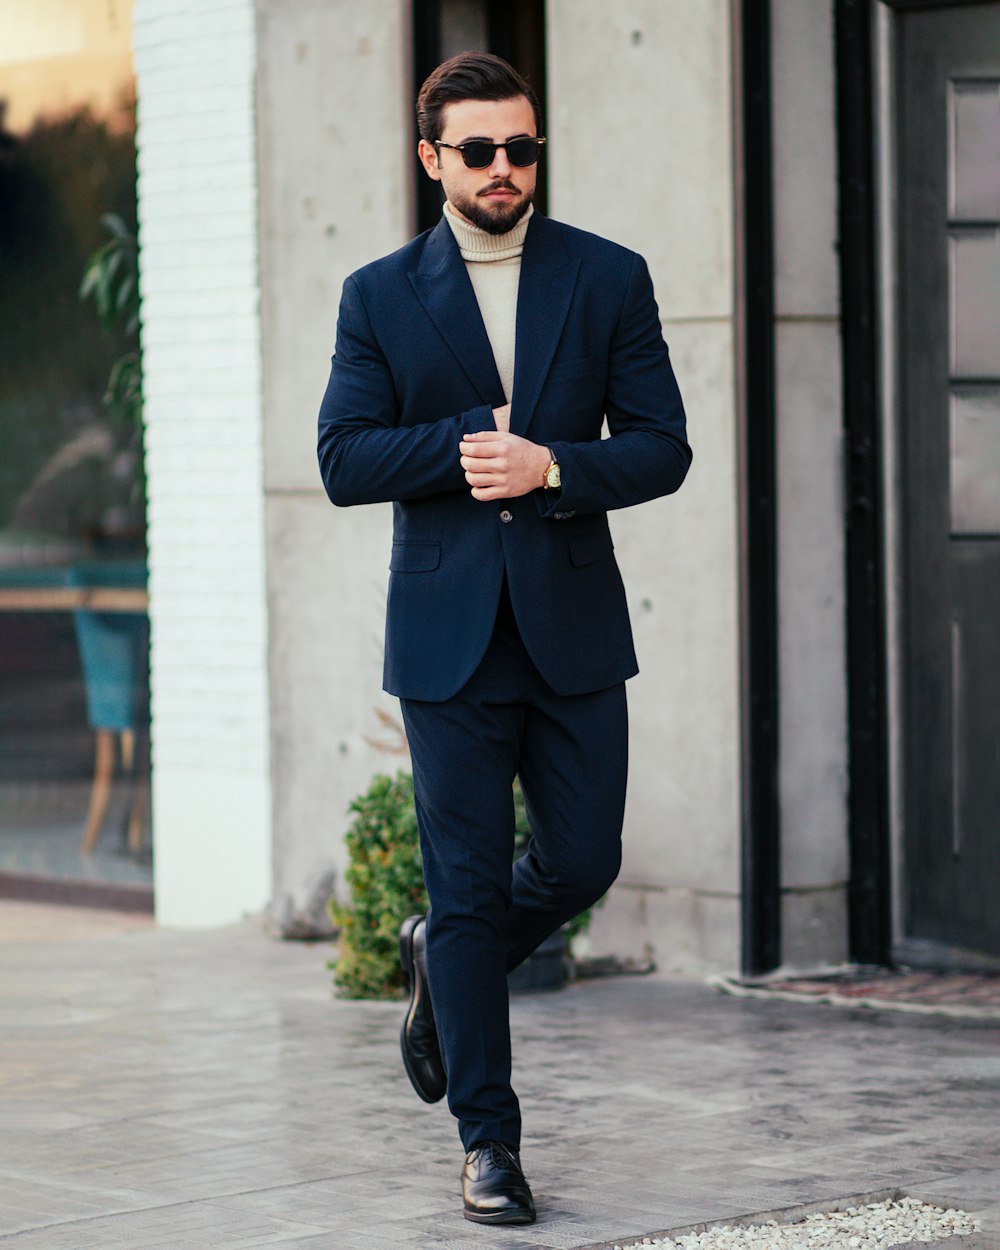 a man in a suit and sunglasses is walking down the street